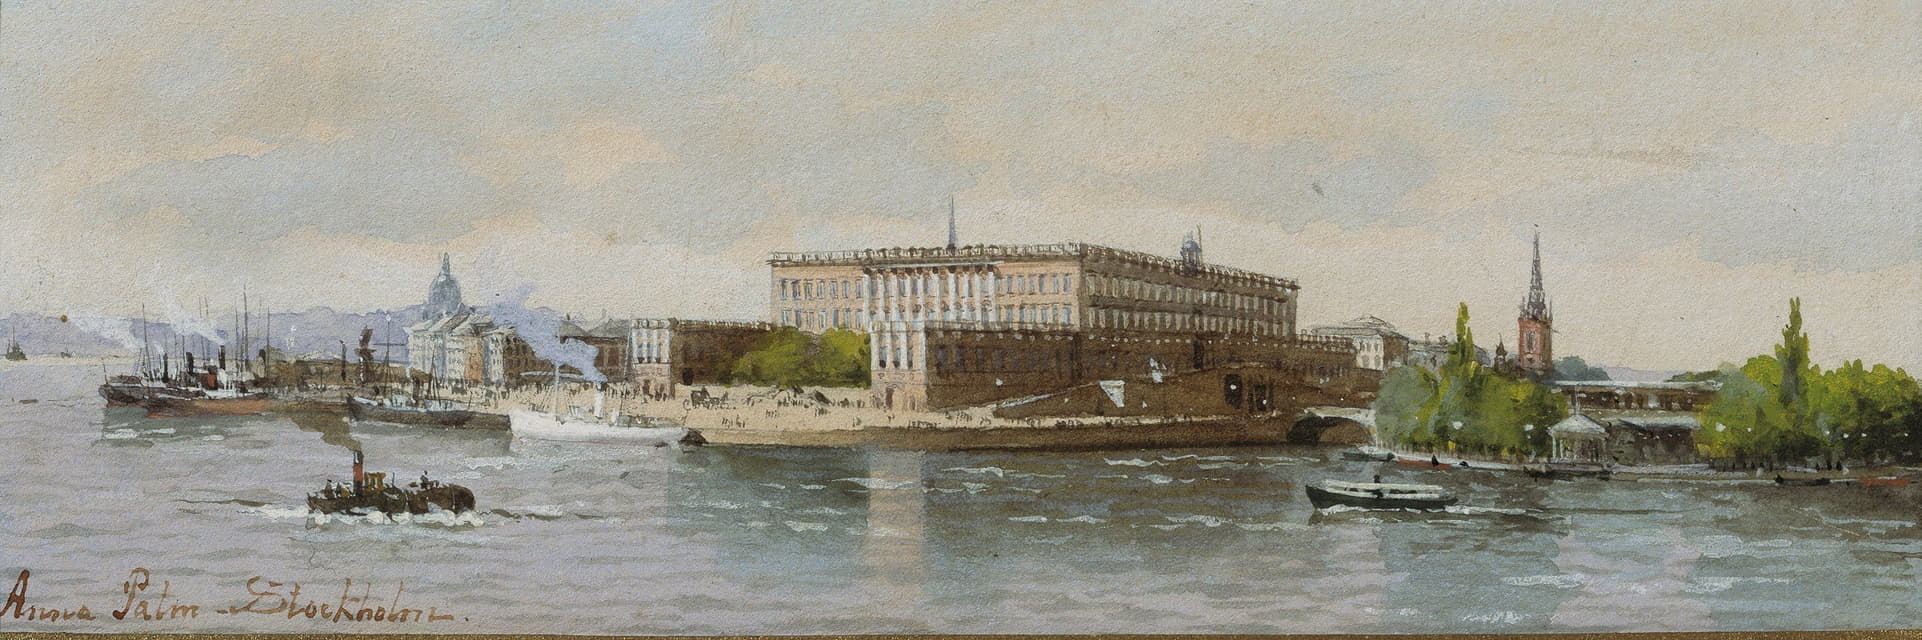 Anonymous - View of the Royal Palace, Stockholm